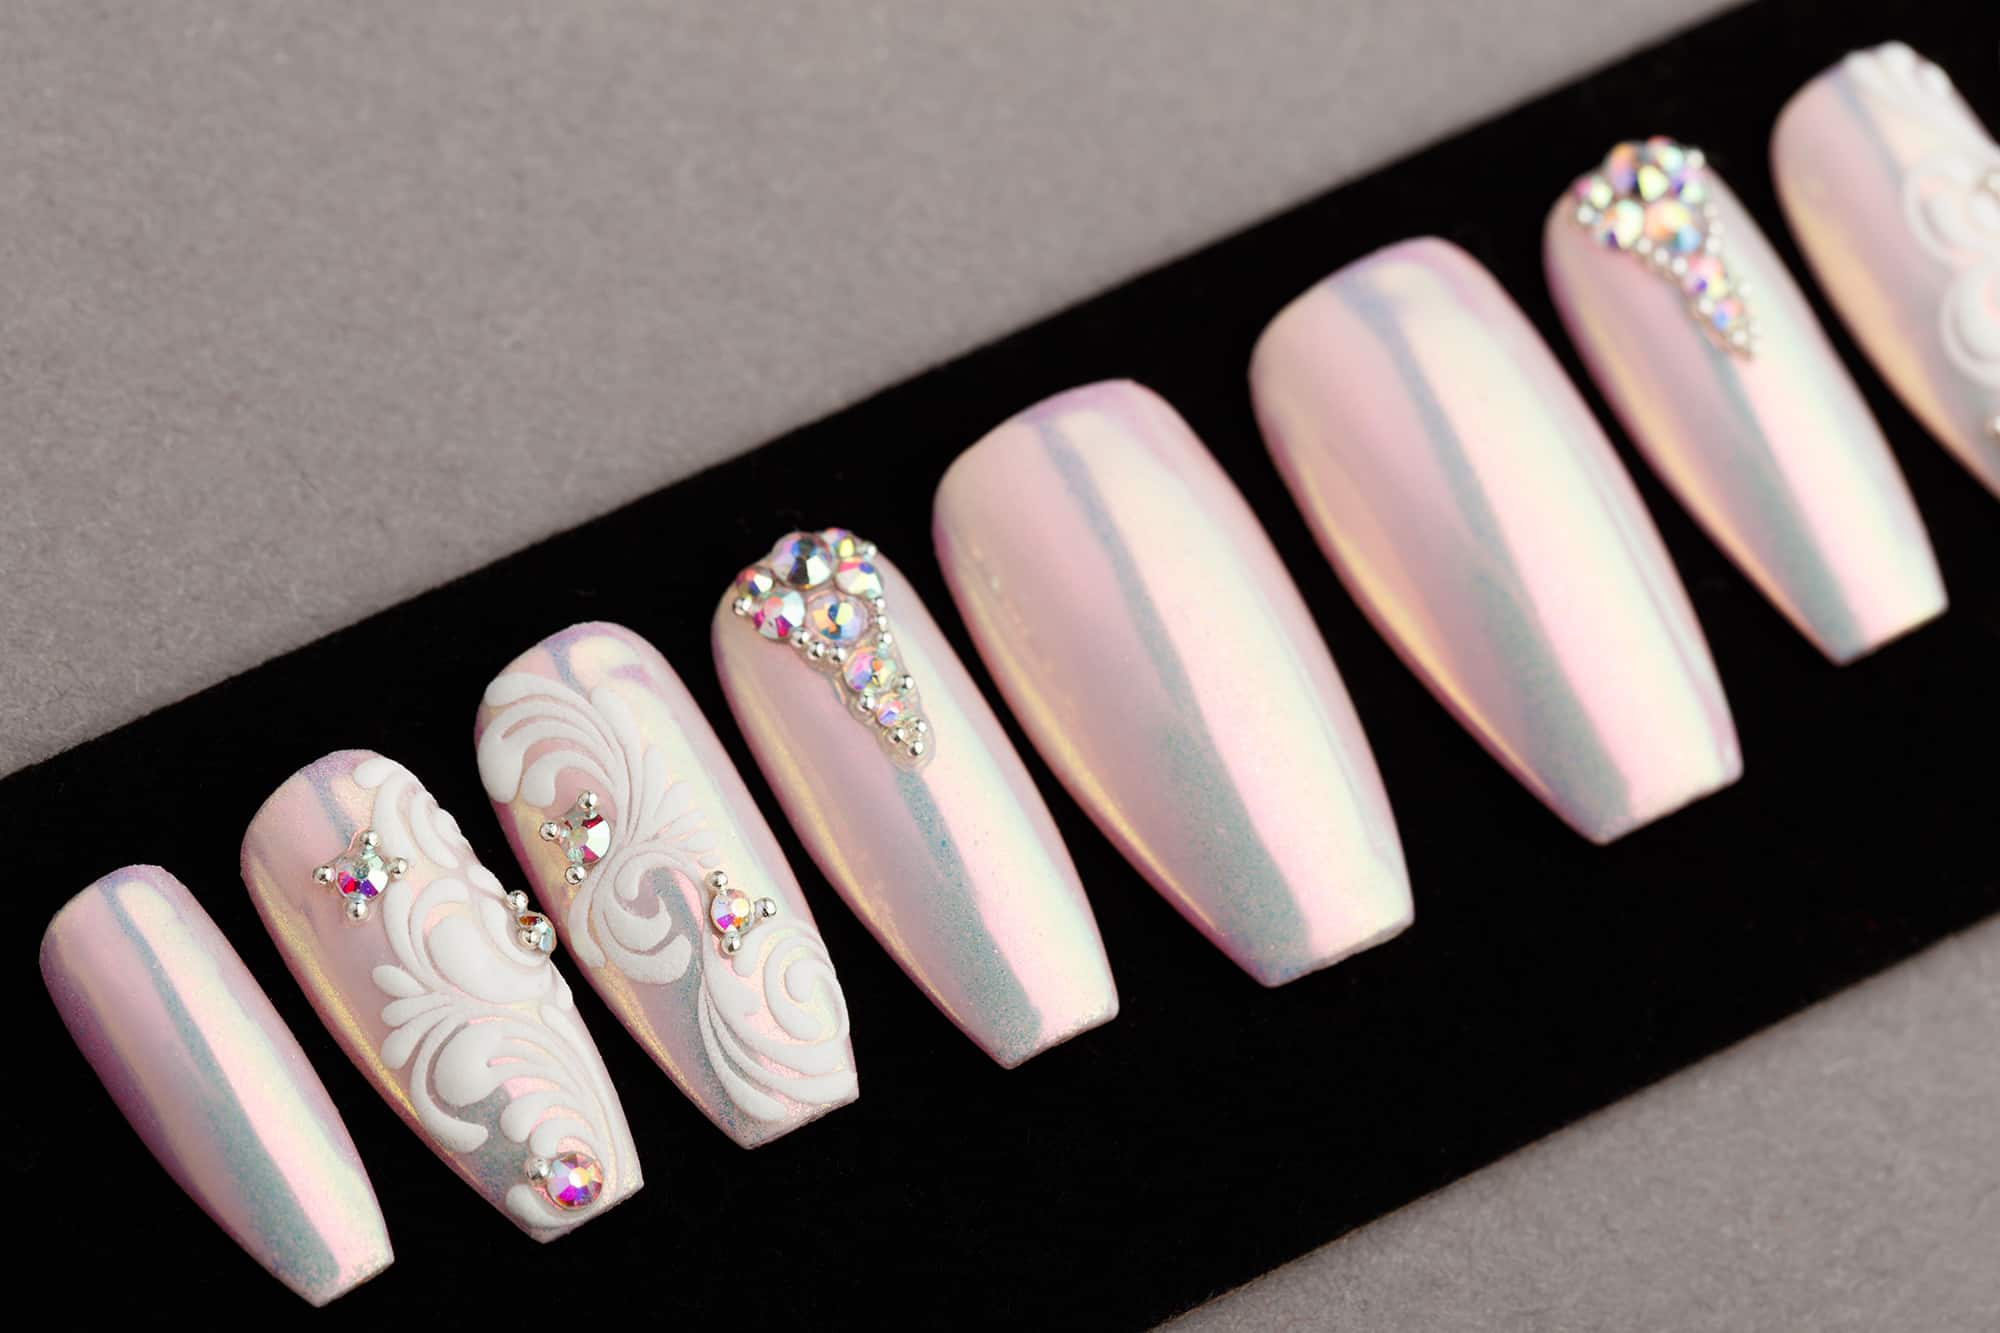 Pink Mirror Press on Nails with Swarovski crystals and Patterns